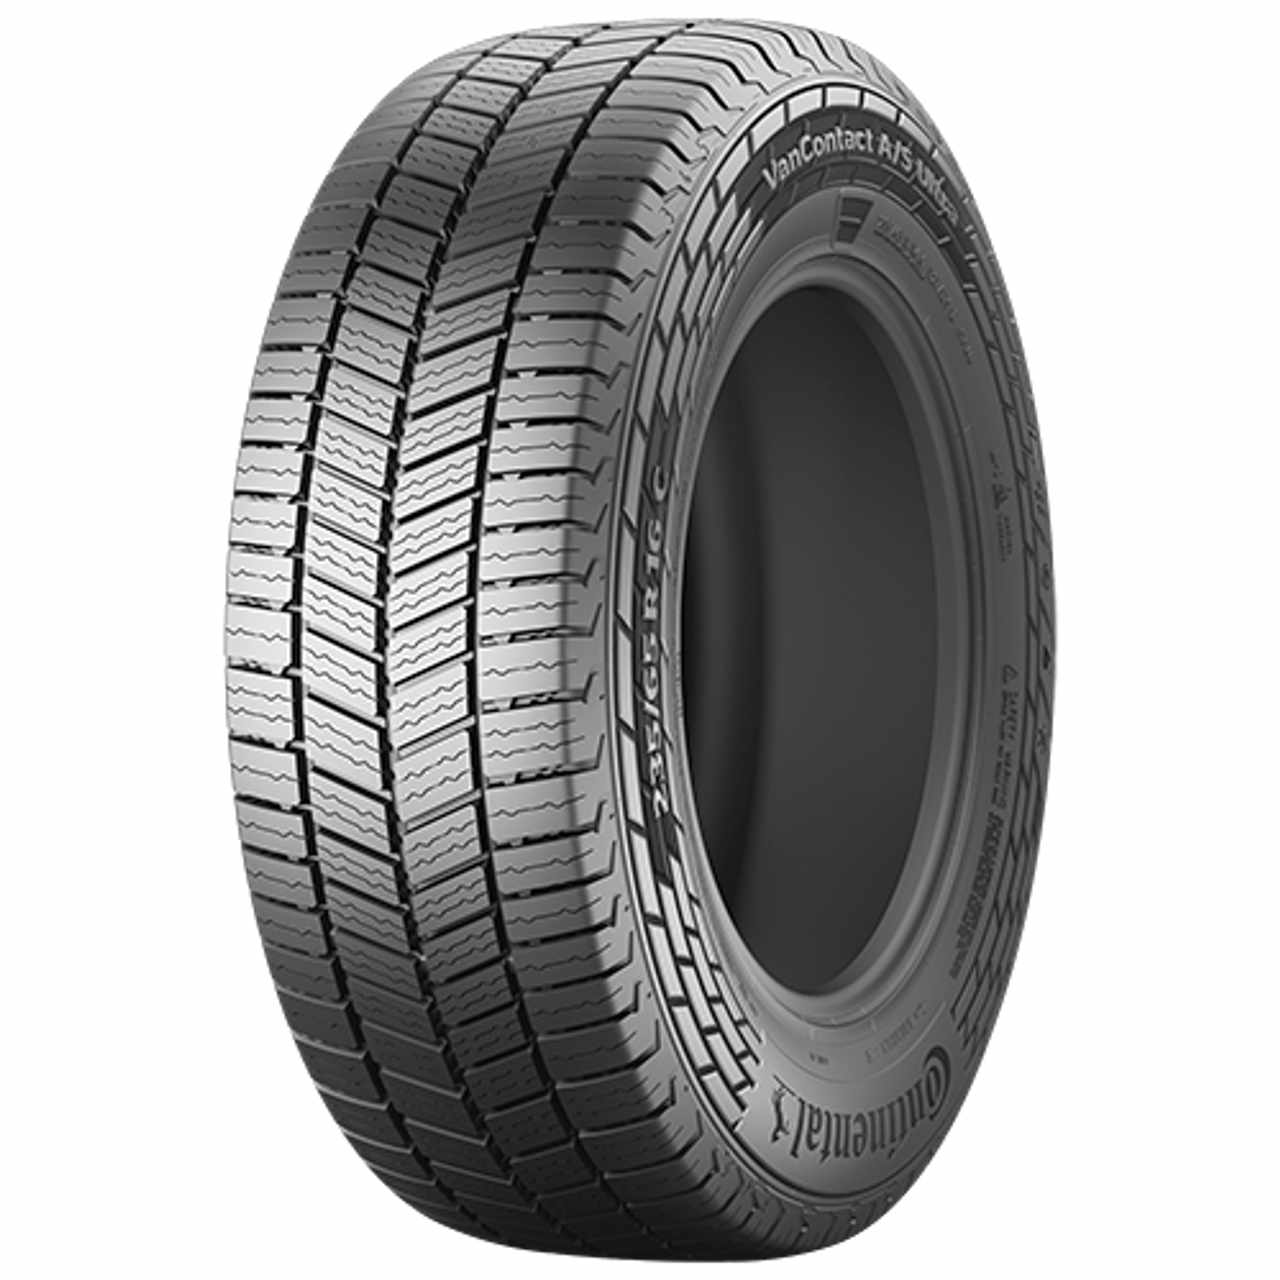 CONTINENTAL VANCONTACT A/S ULTRA 205/70R17C 115R BSW von Continental